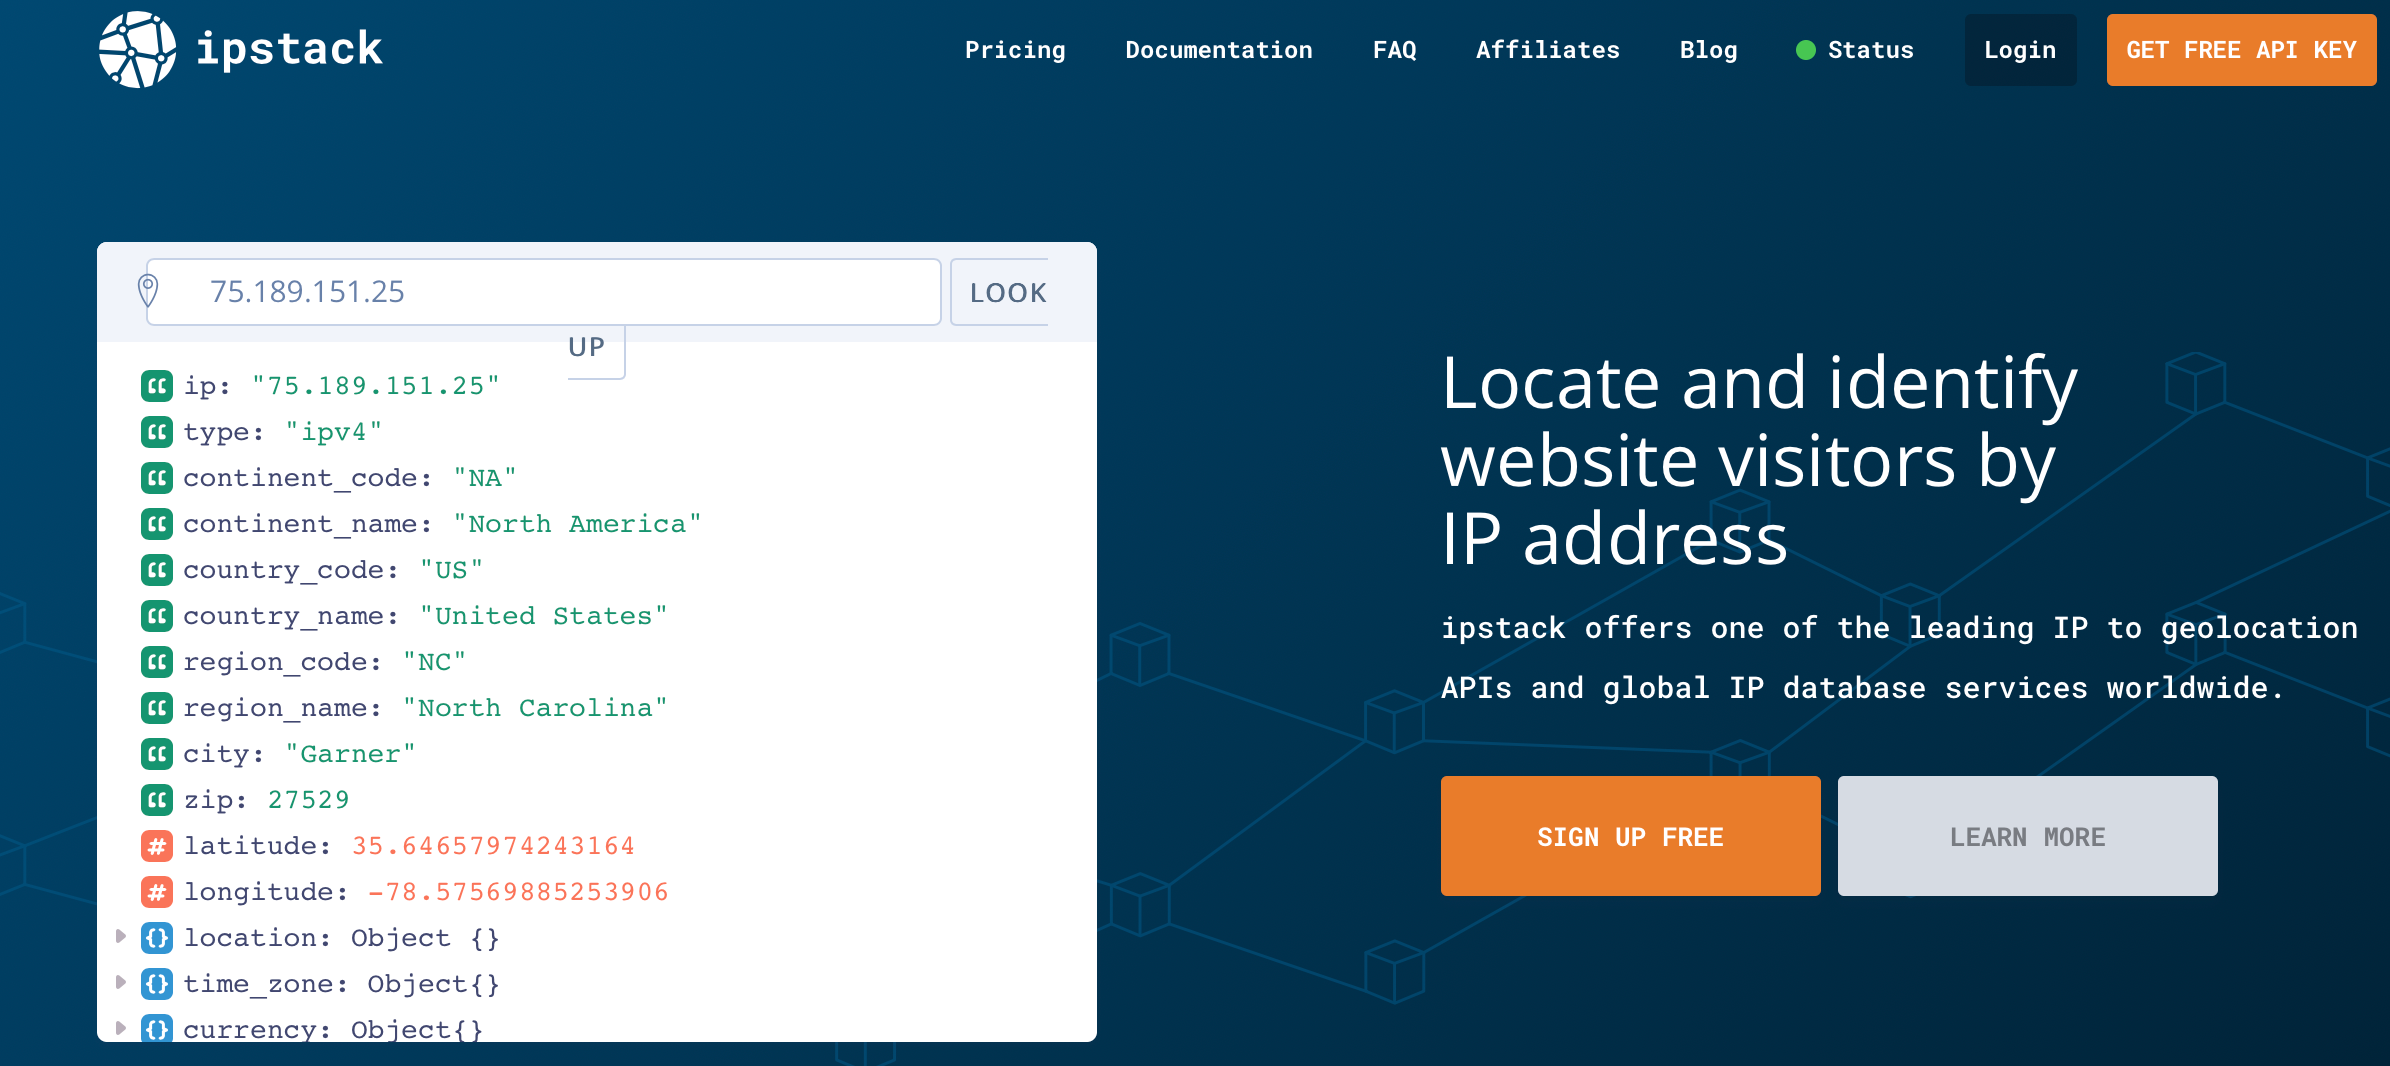 ipstack for accurate IP geolocation data